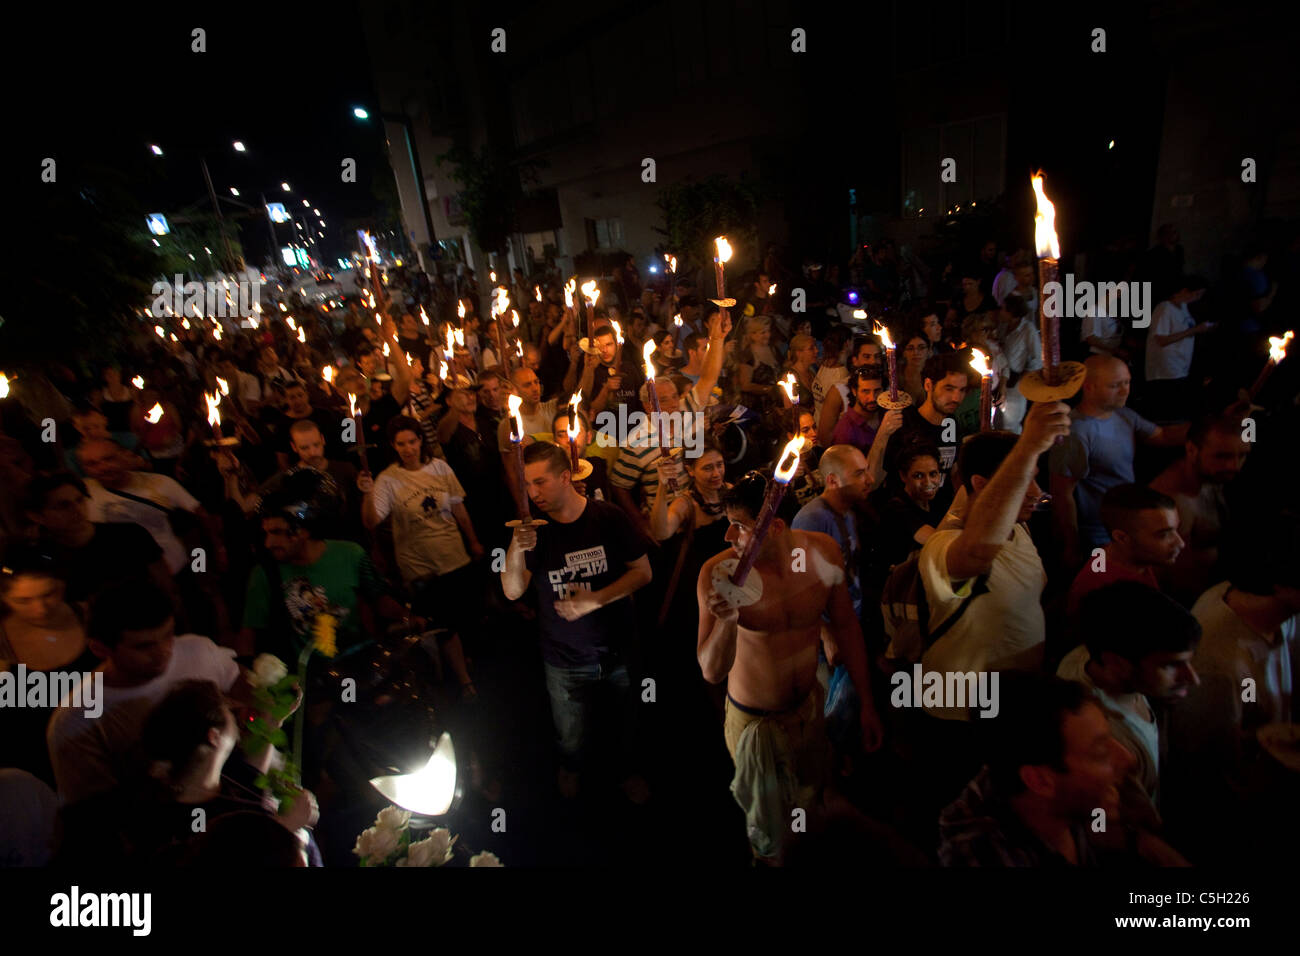 Demonstrators taking part in a torch lit march against raising housing prices in the country. downtown Tel Aviv Israel. The social justice protest also named the Tents protest were a series of demonstrations in Israel beginning in July 2011 involving hundreds of thousands of protesters from a variety of socio-economic opposing the continuing rise in the cost of living particularly housing. Stock Photo